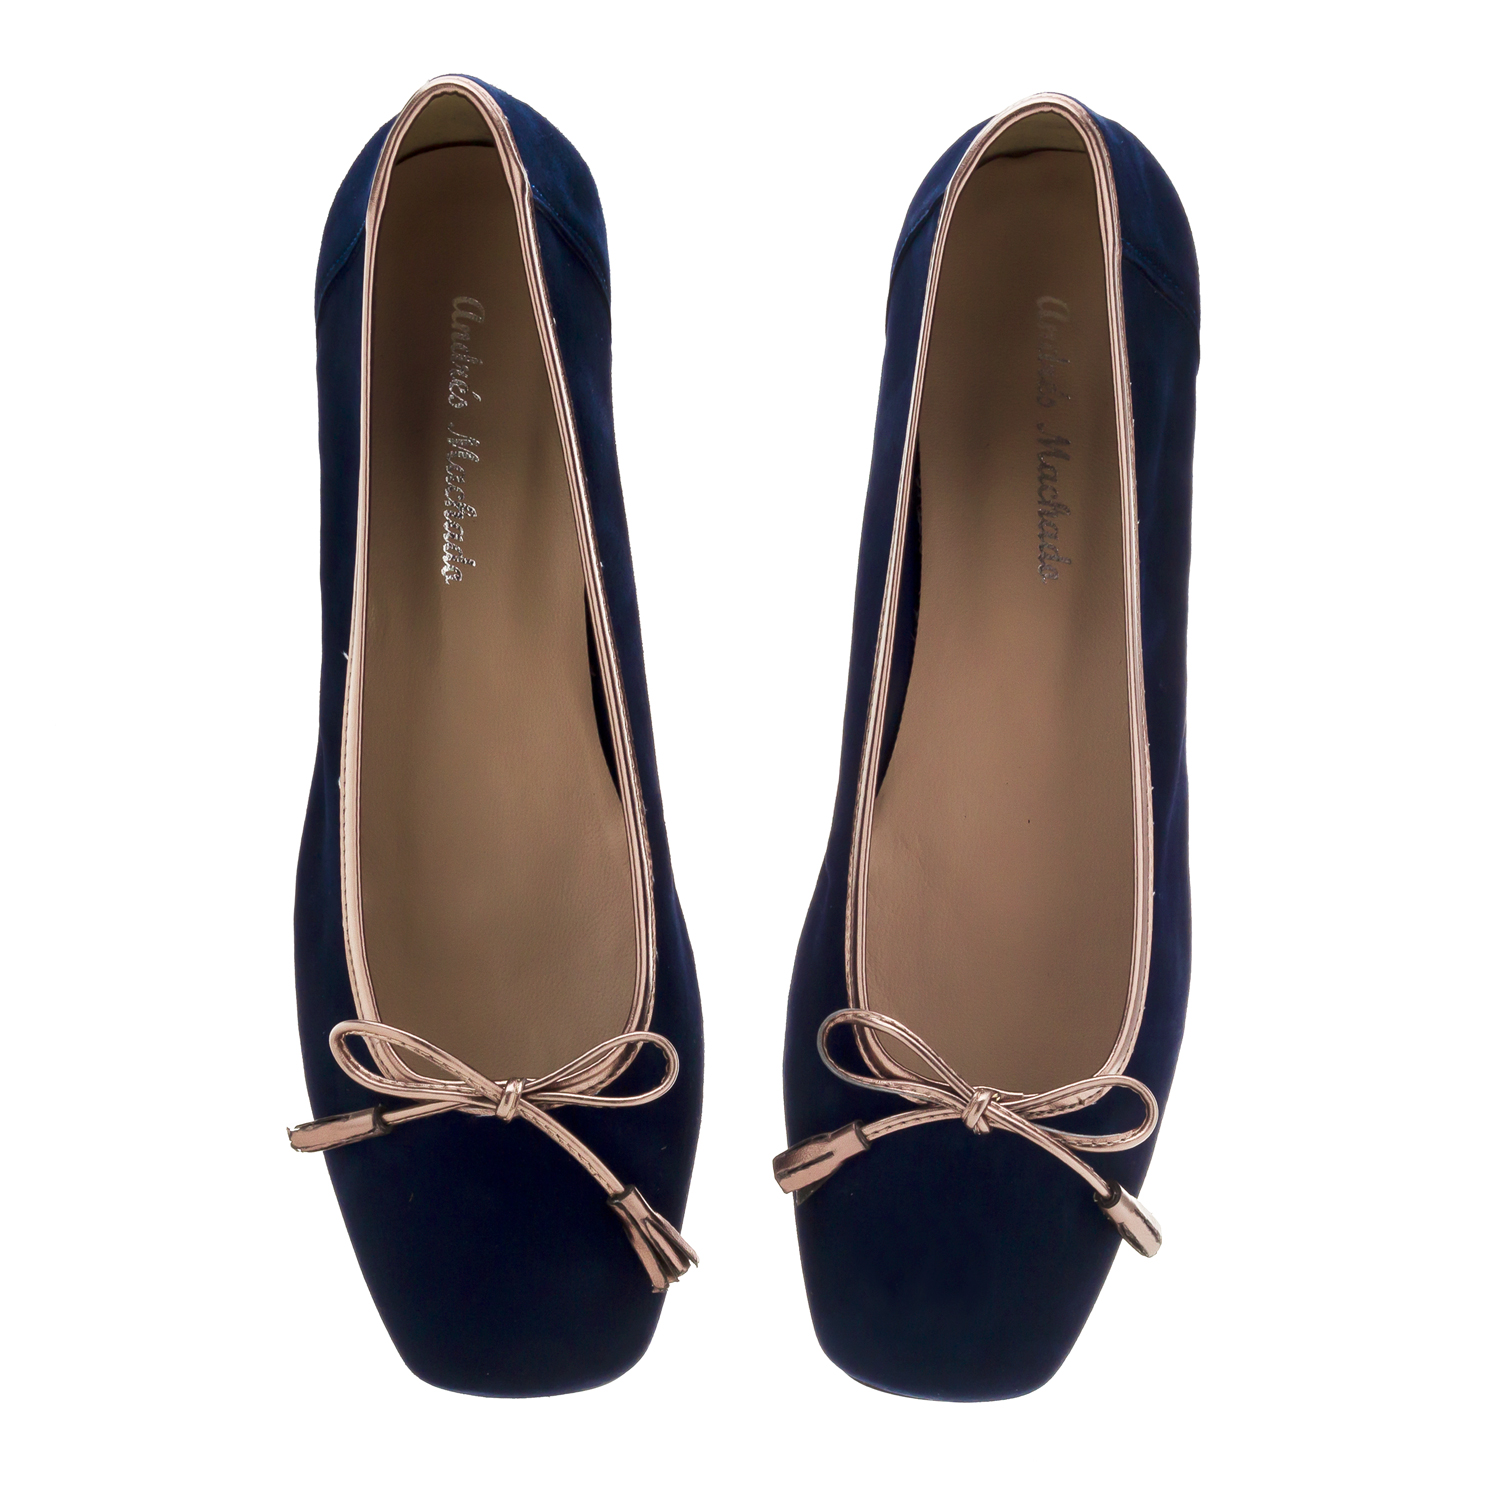 Bow Ballet Flats in Navy Suede Leather 